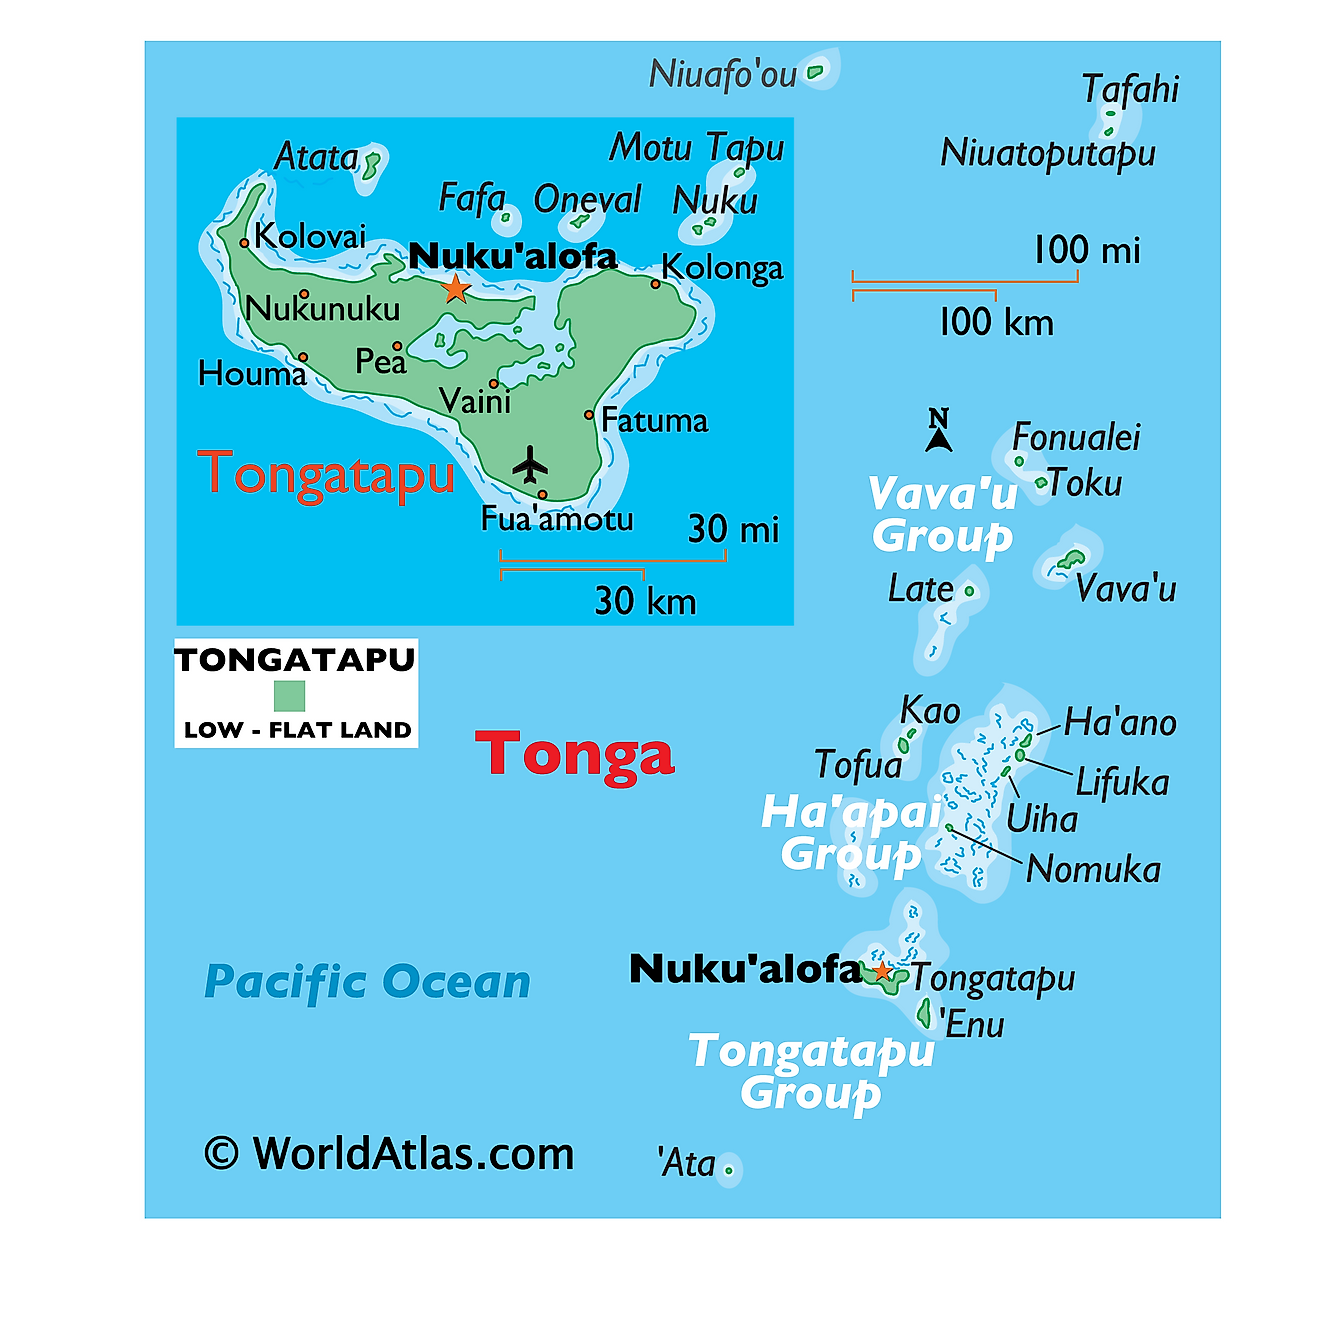 Where is tonga located on the map